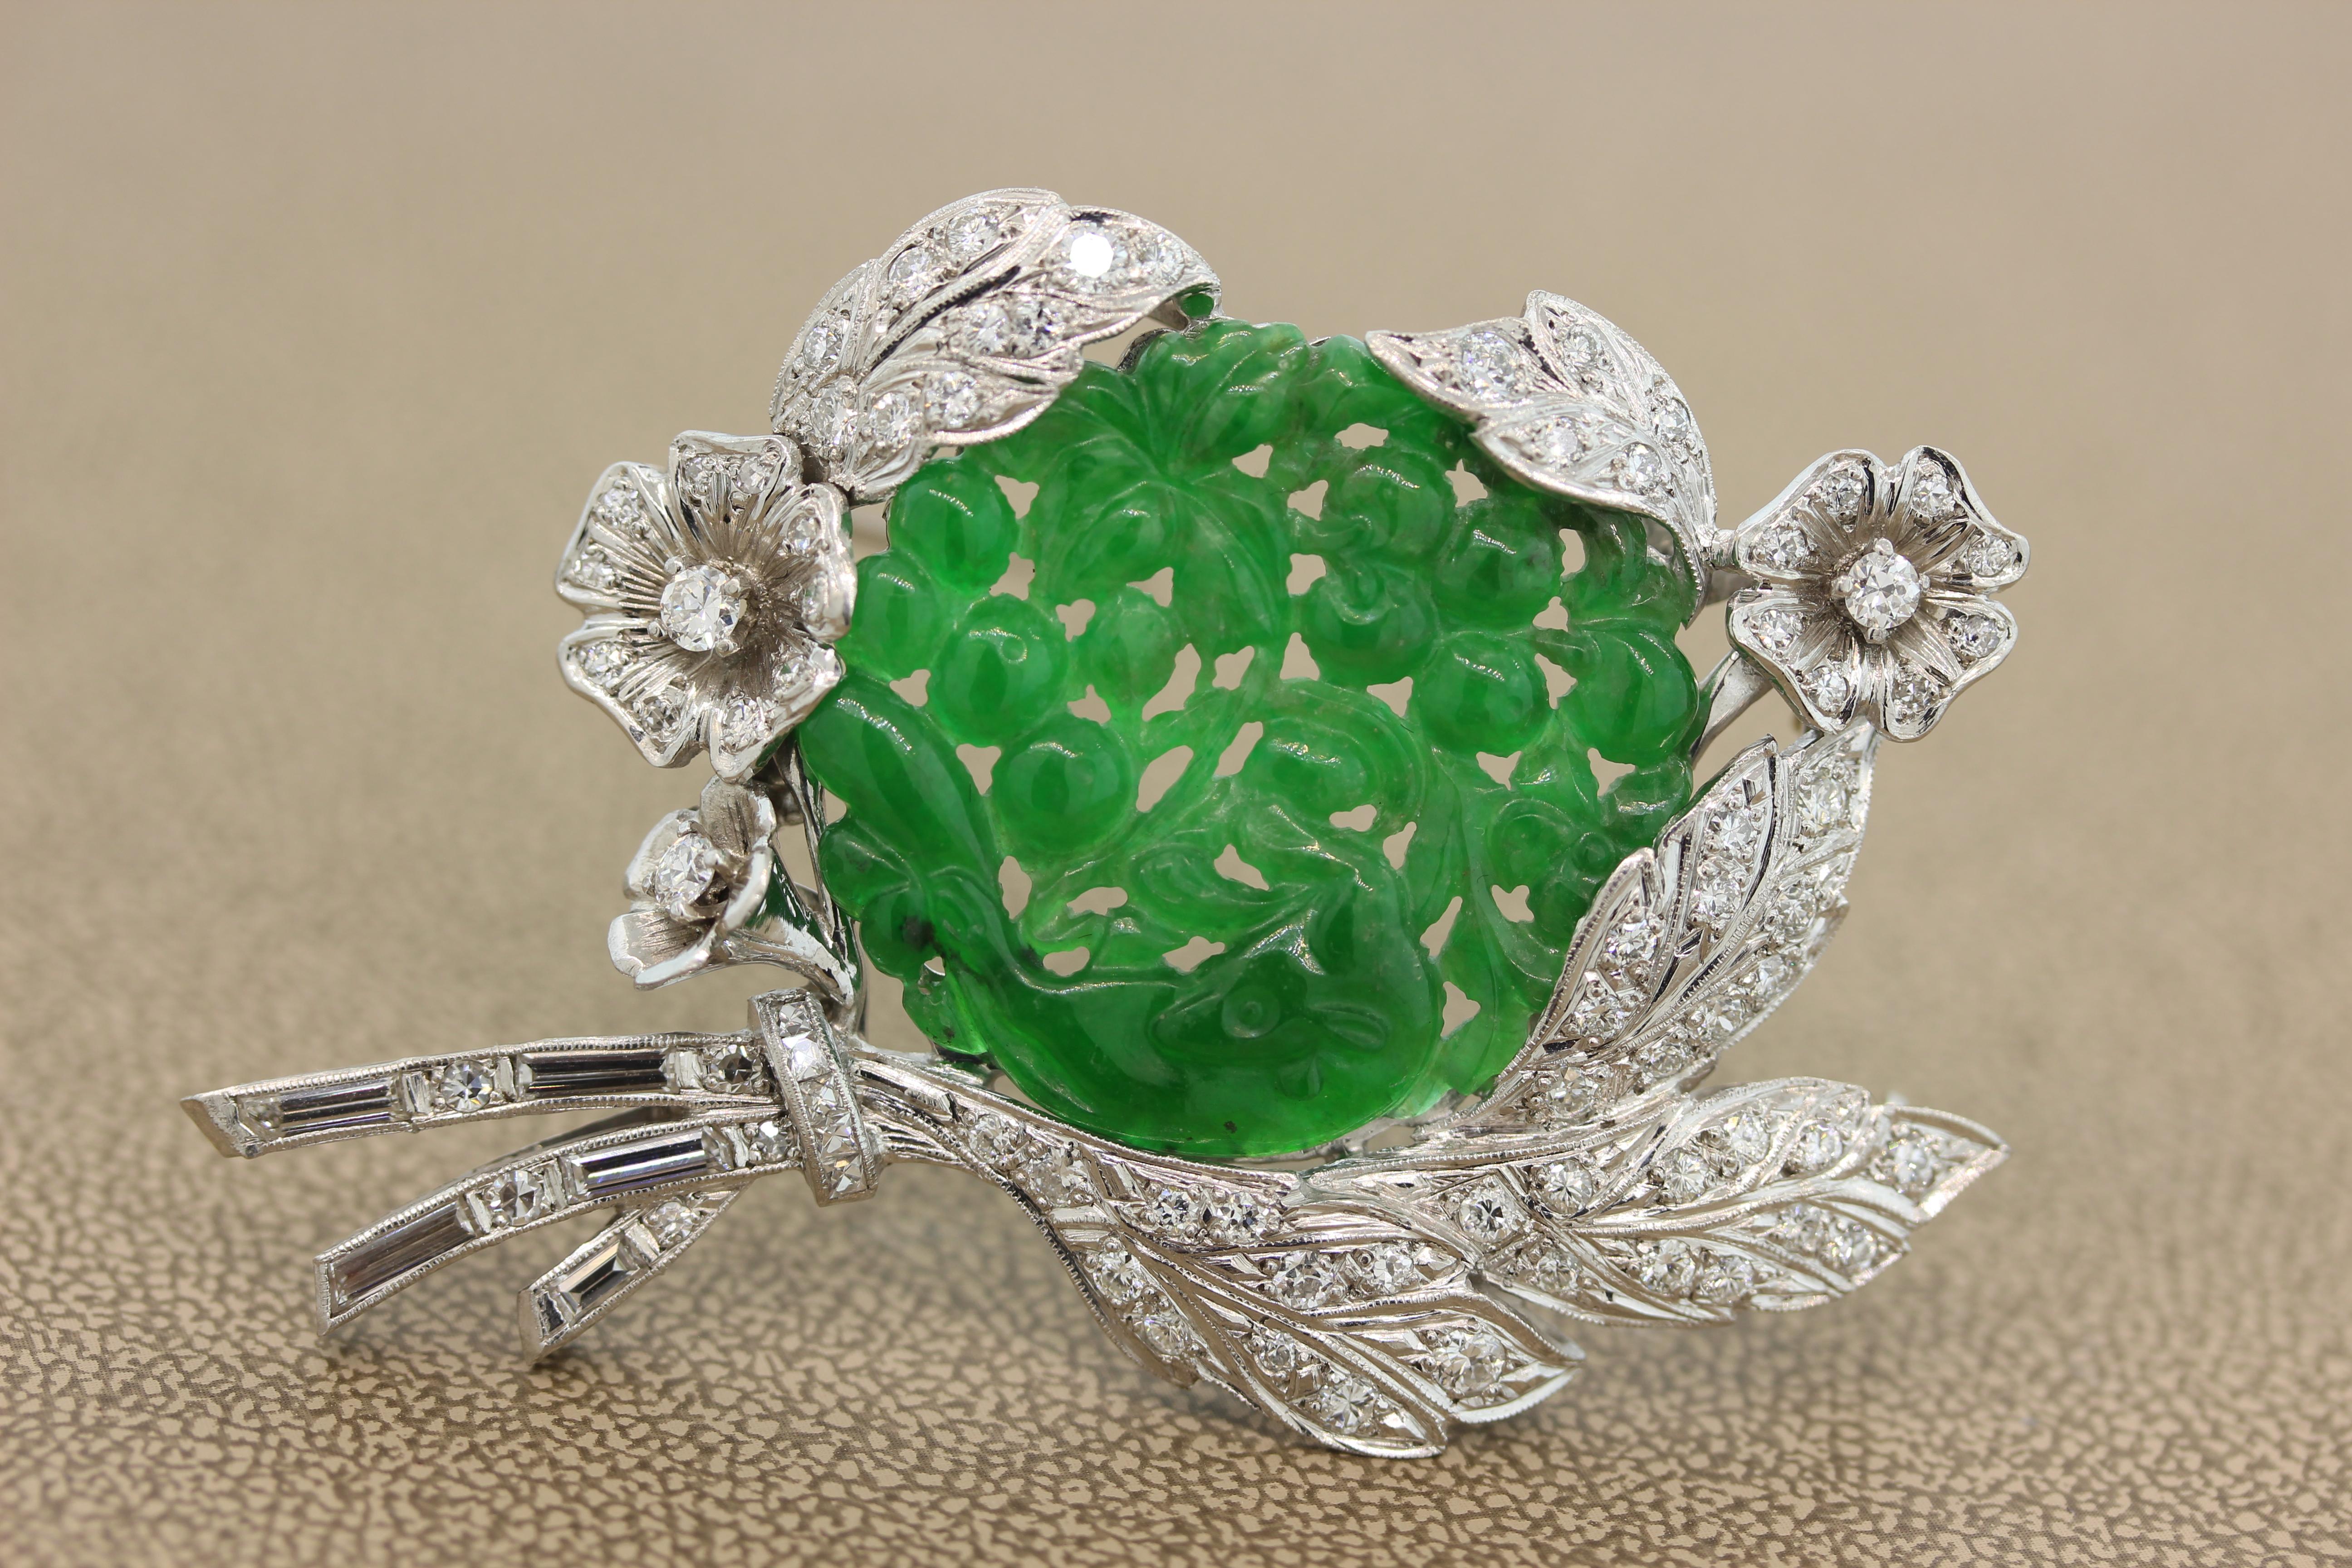 A magnificent Mid-Century convertible brooch that doubles as a pendant. A lustrous translucent piece of carved jade depicts an animal amidst a flower garden. The carved jade is set in platinum with approximately 2.40 carats of round and baguette